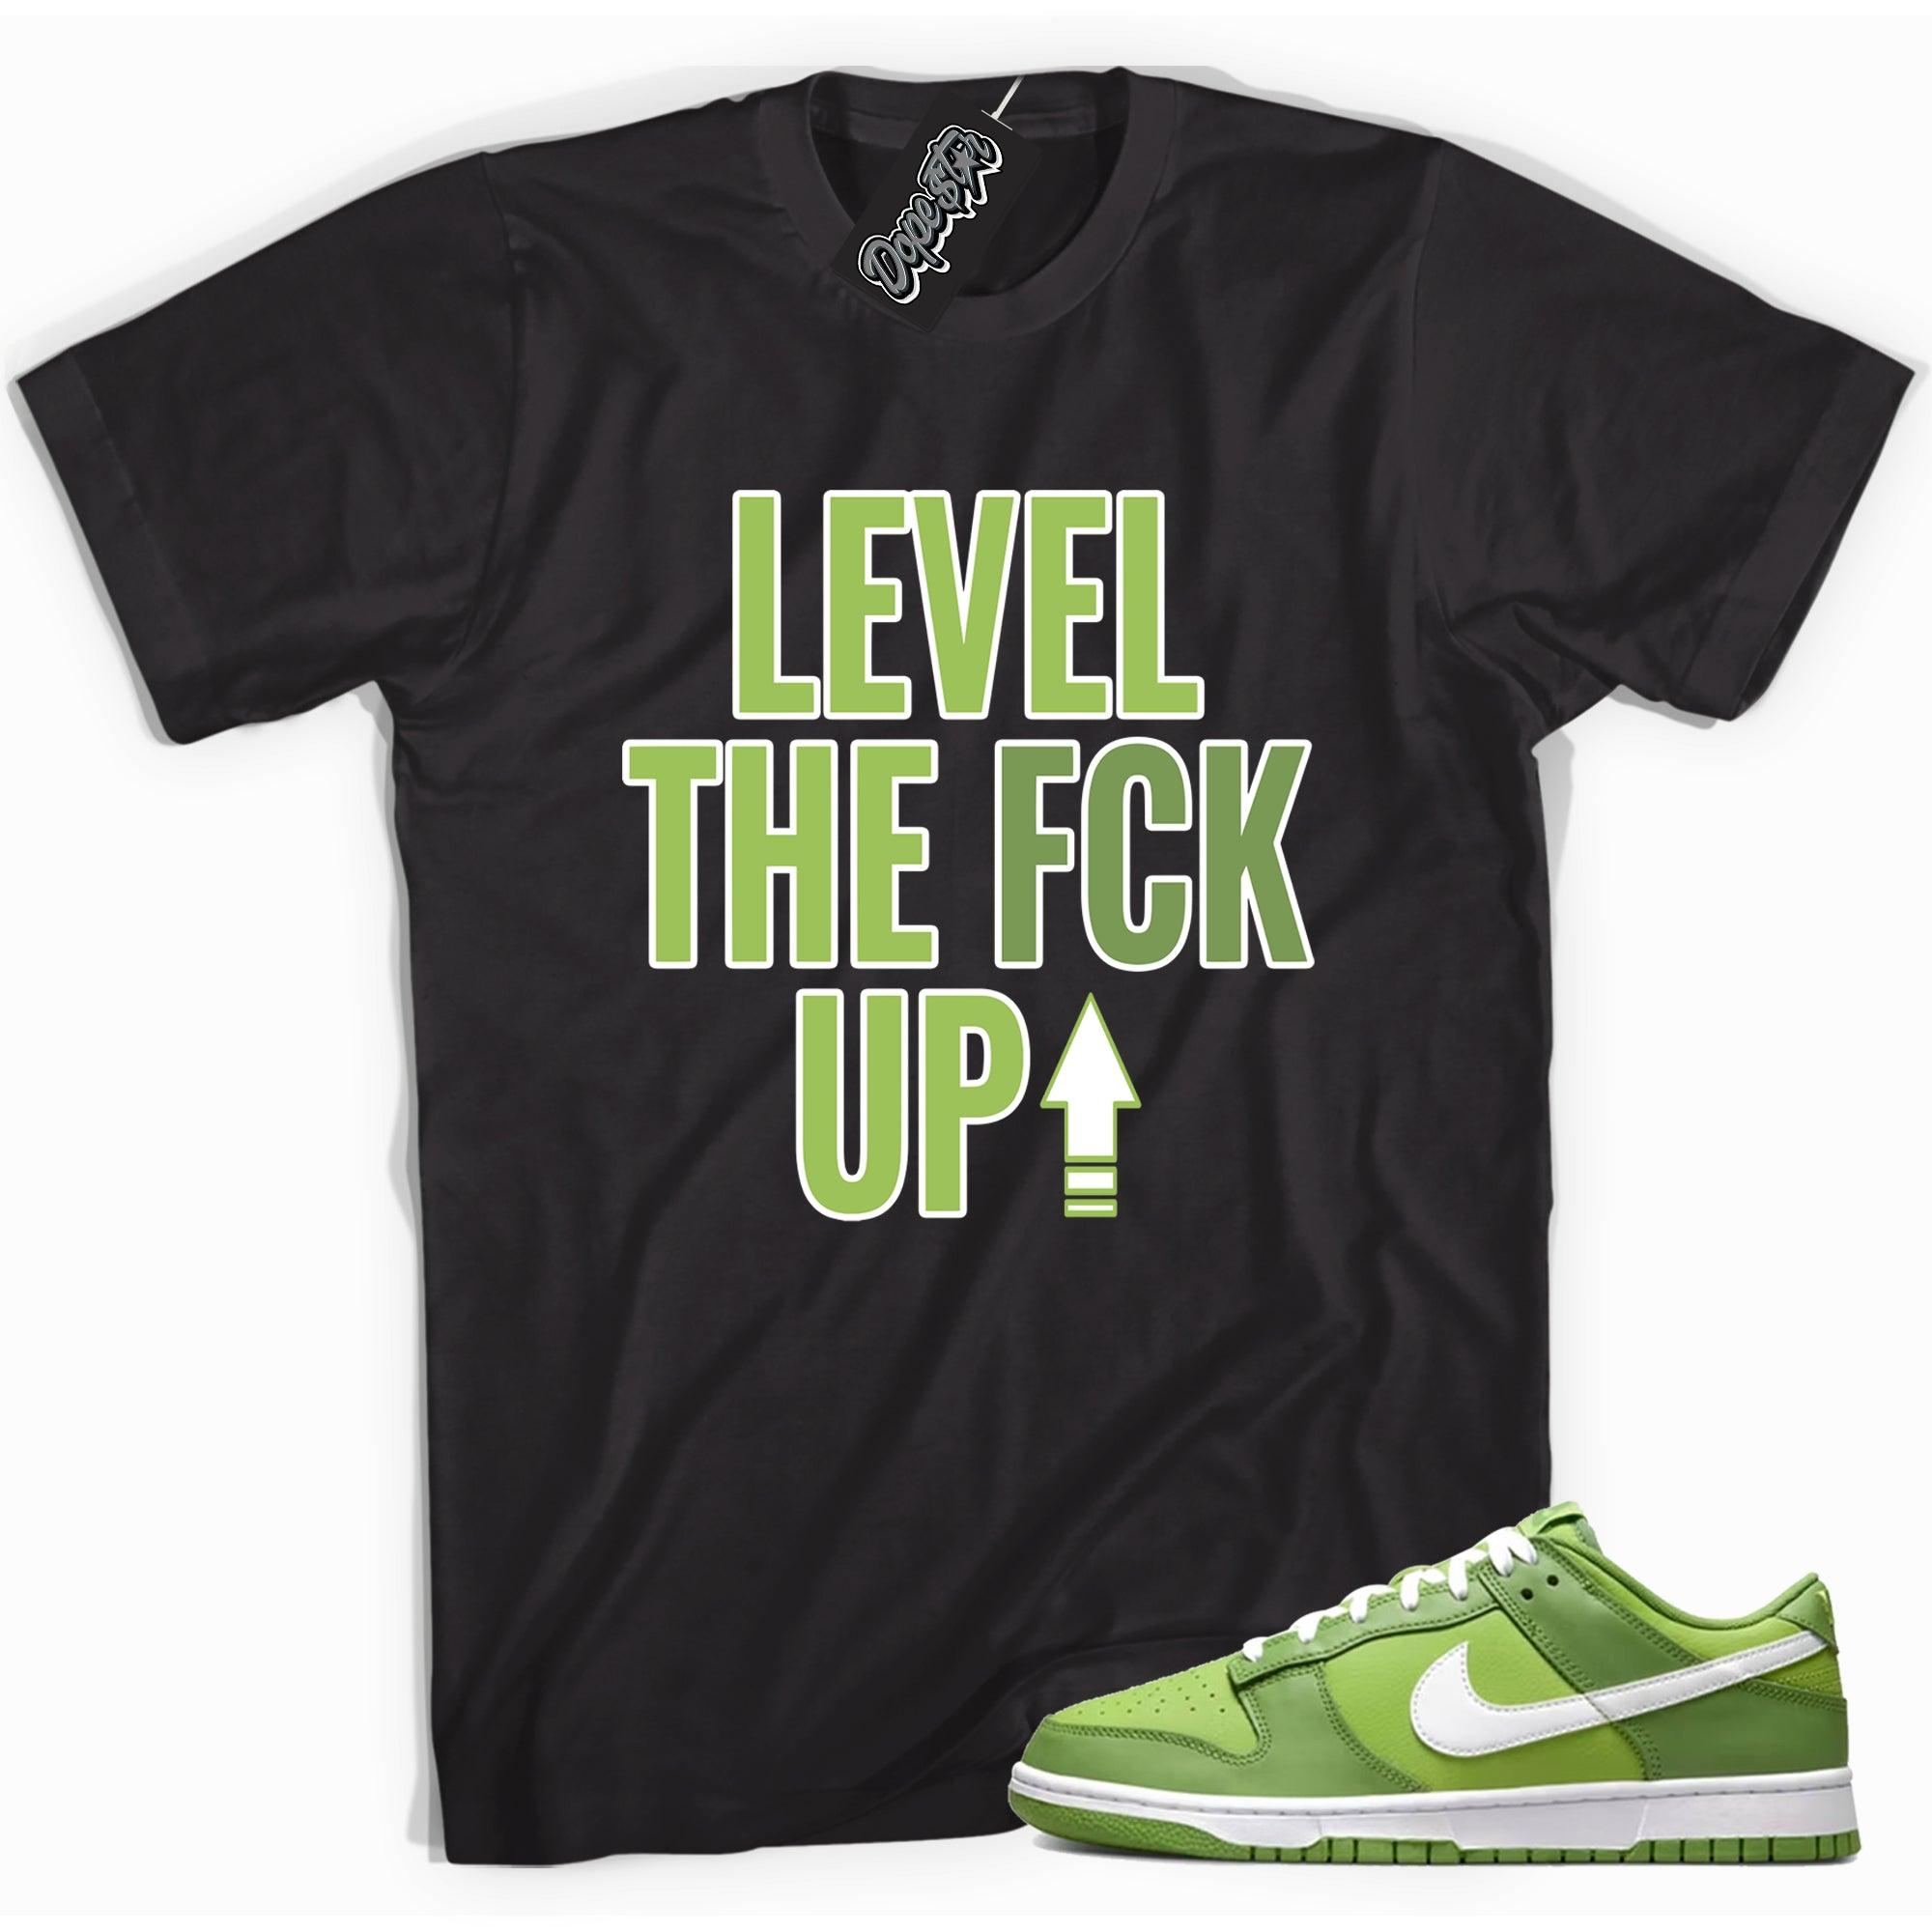 Cool black graphic tee with 'Level Up' print, that perfectly matches Nike Dunk Low Chlorophyll sneakers.